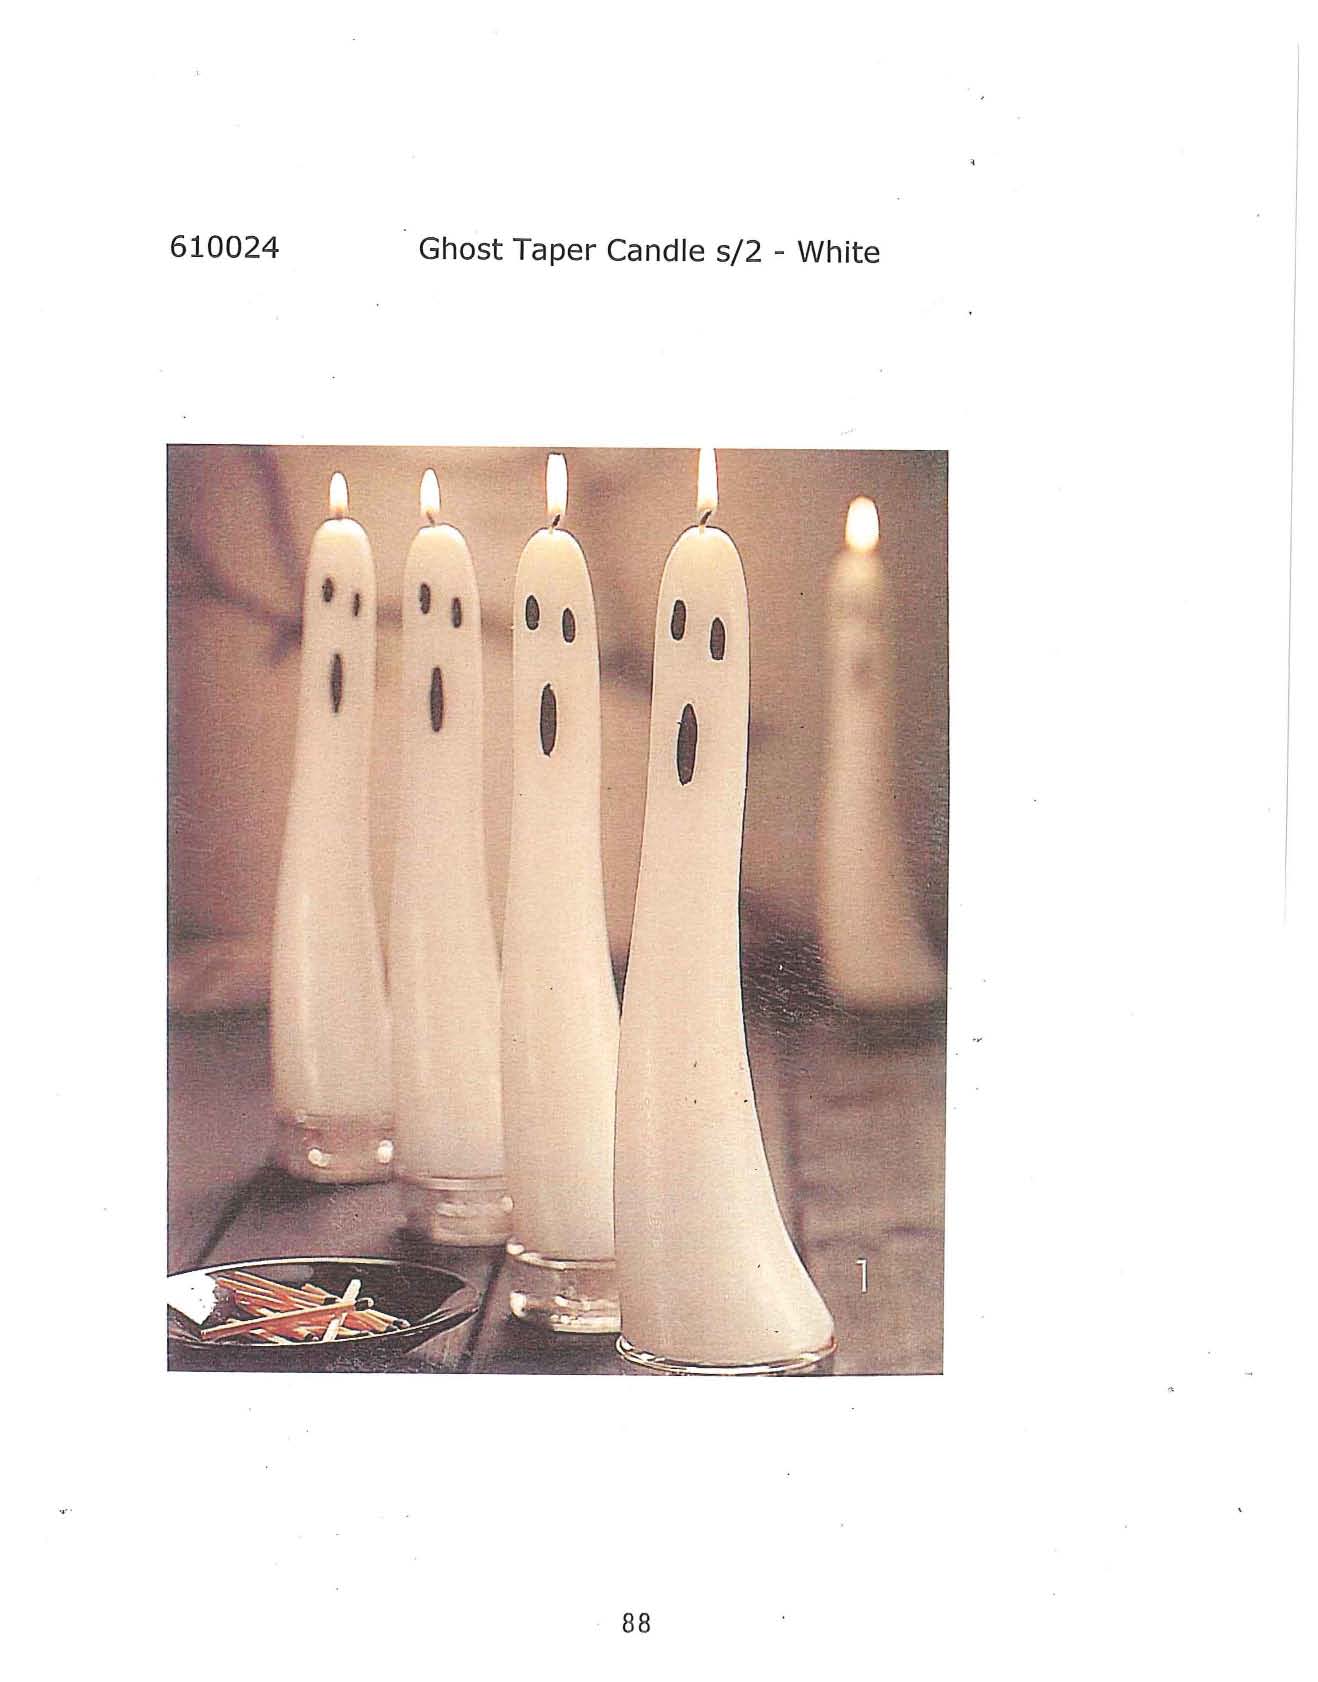 Ghost Taper Candle s/2 - White